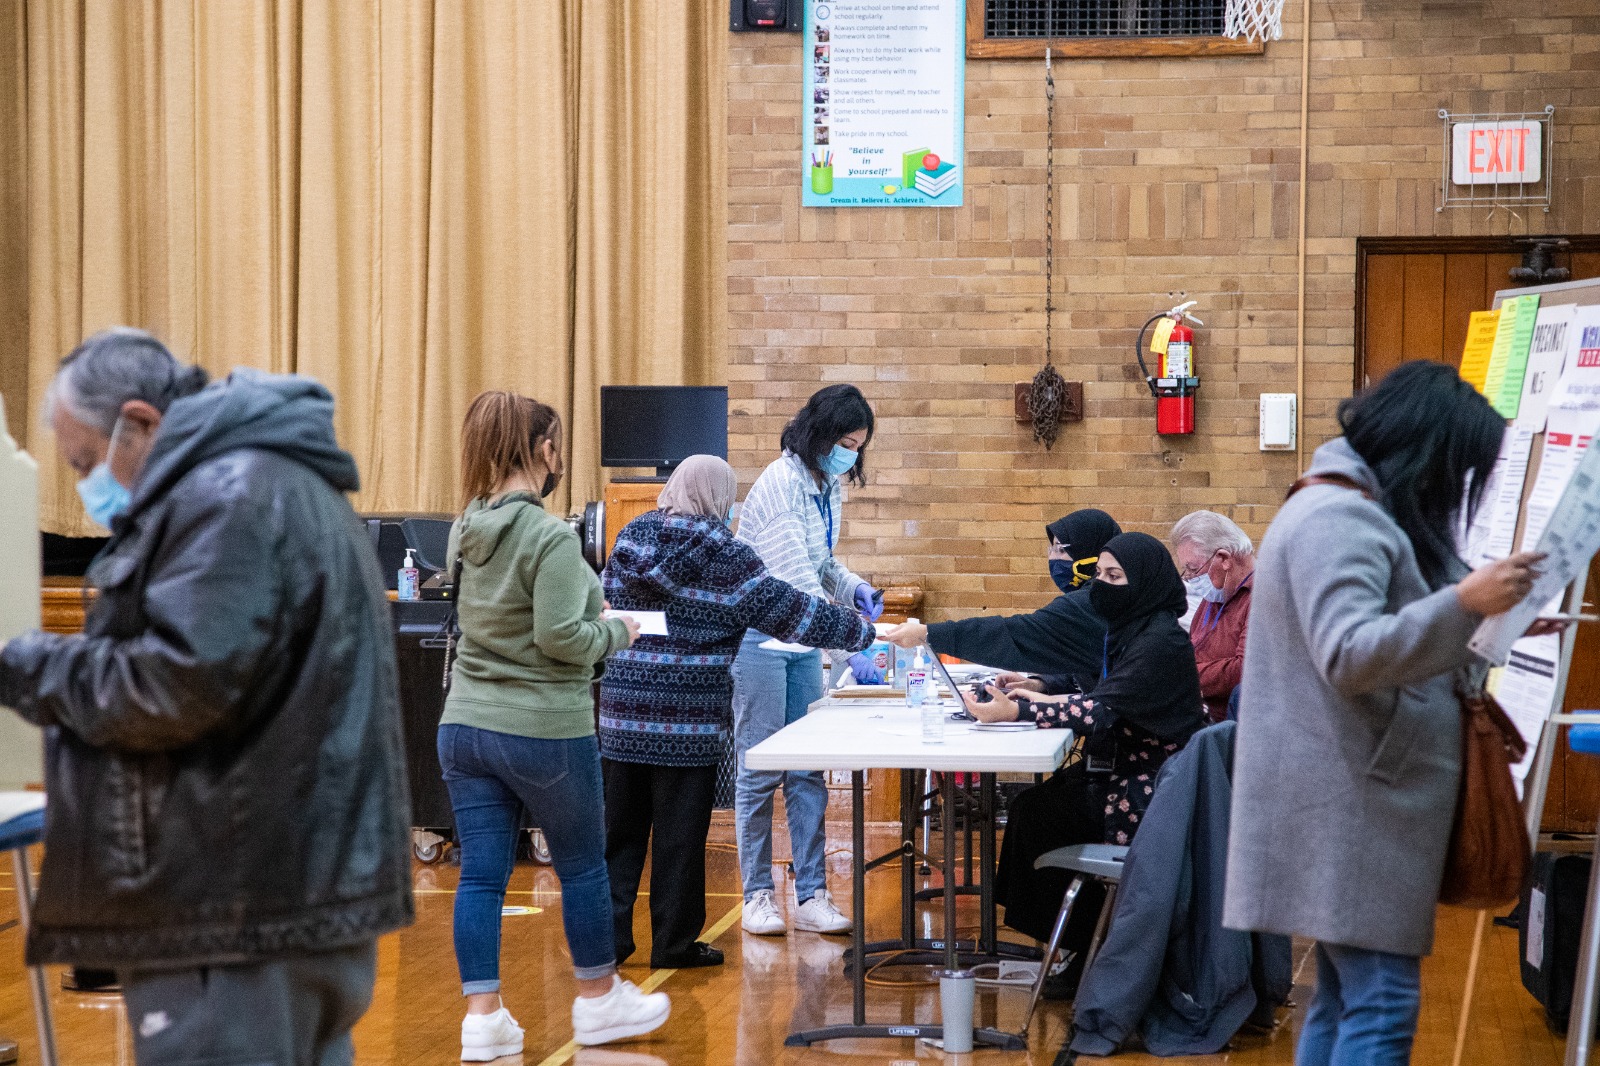 Voters at a precinct in Oakman School in Dearborn, Tuesday, Nov. 3. All photos: Imad Mohamad/The Arab American News